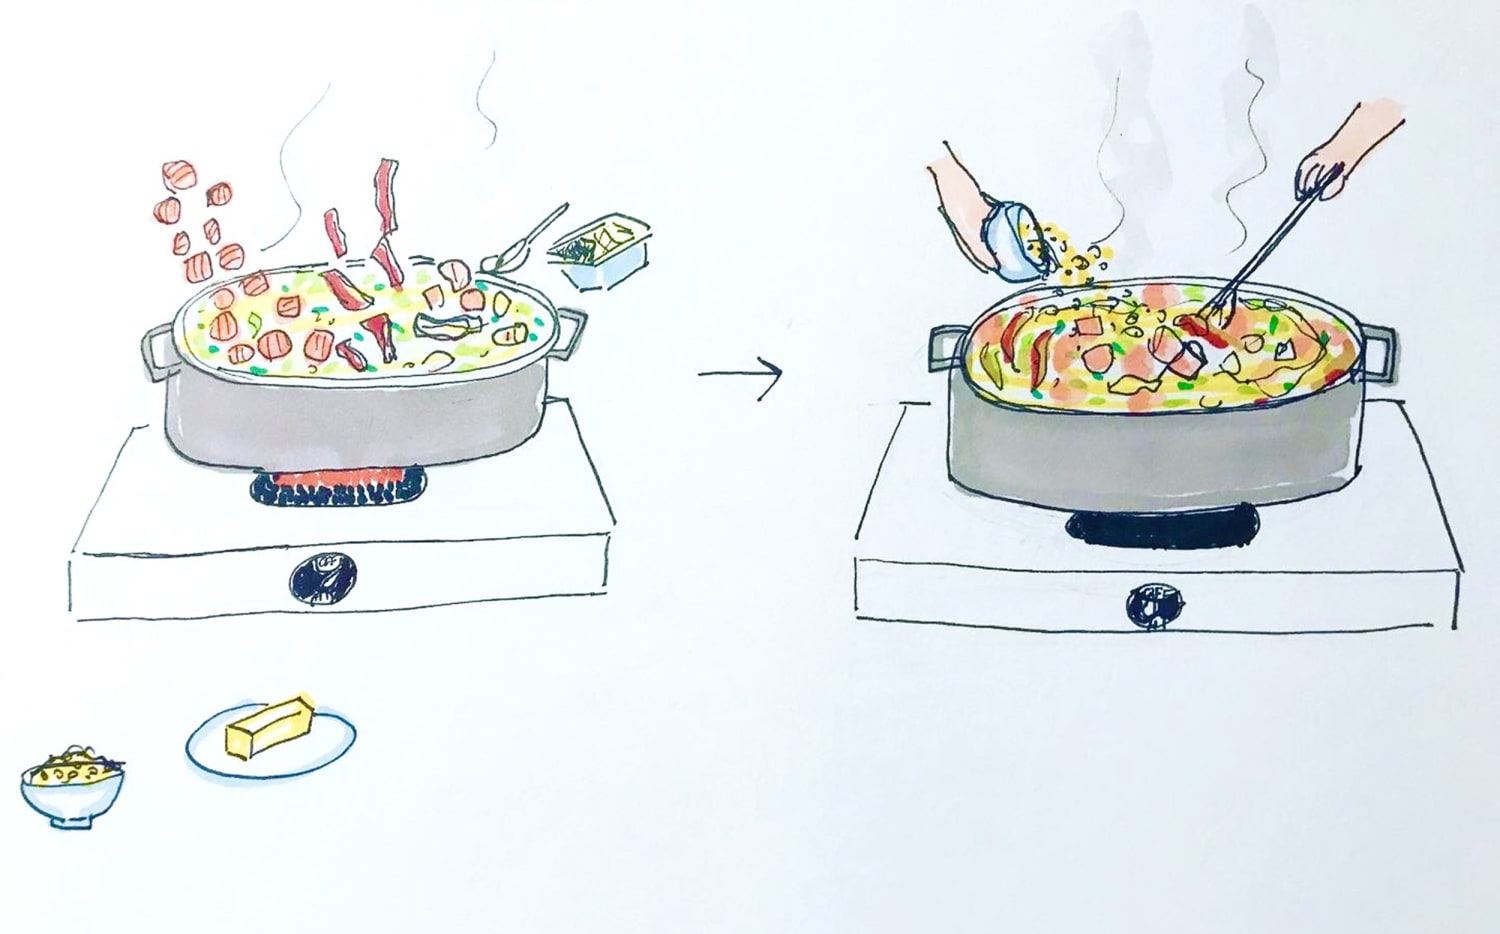 How to Hot Pot: An Illustrated Guide